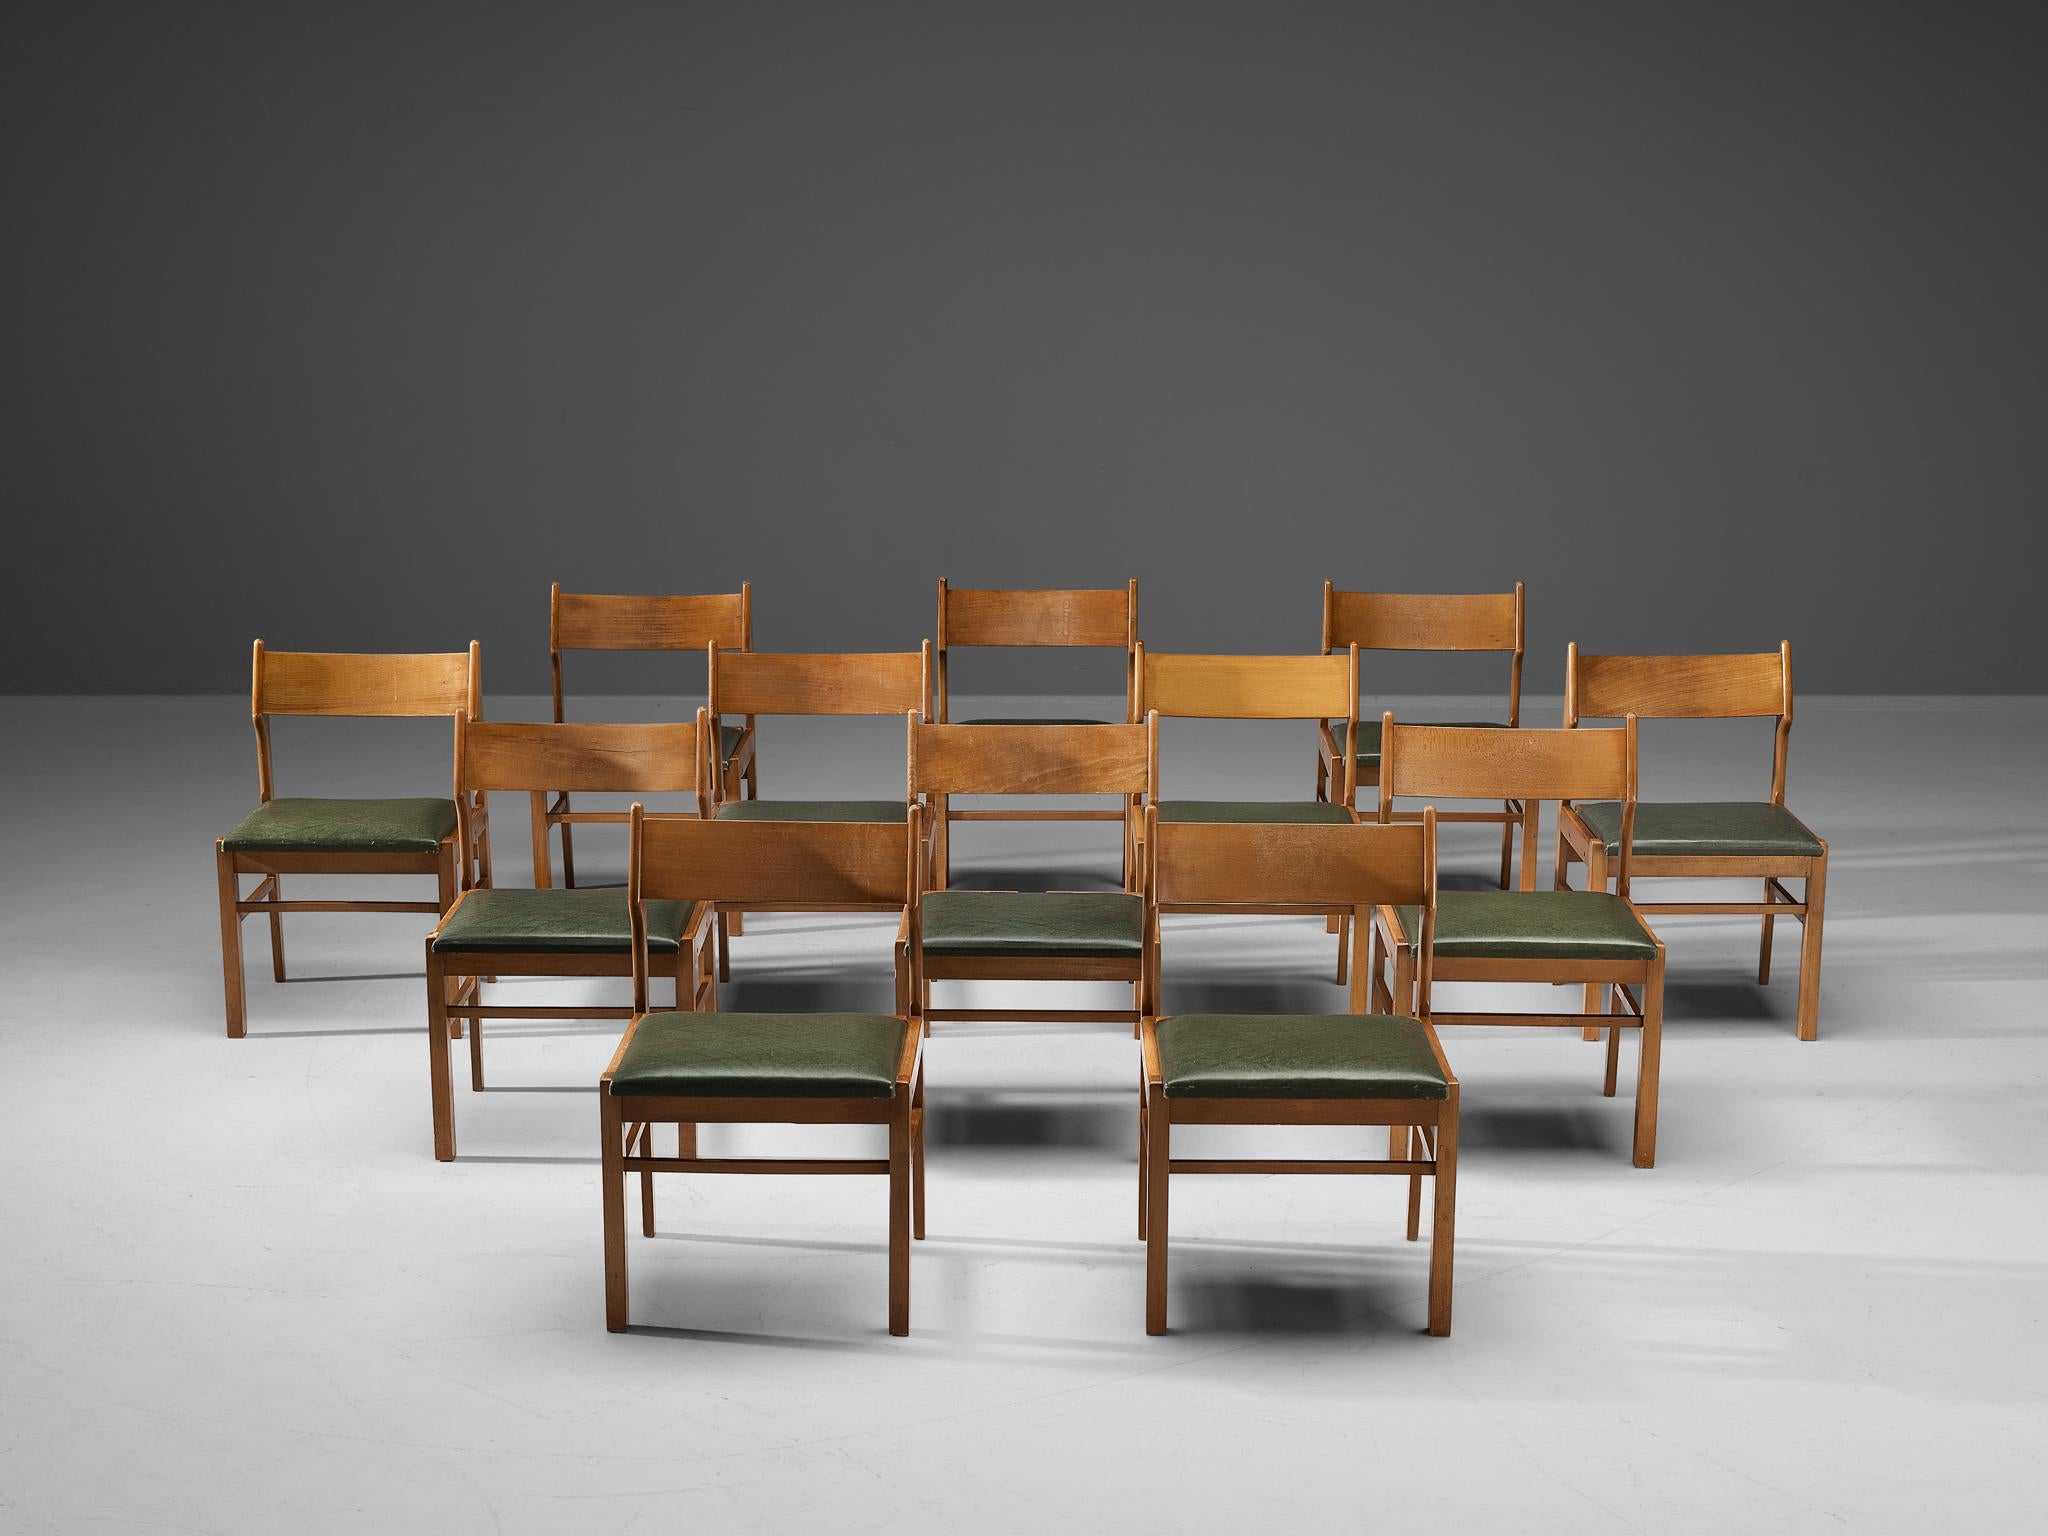 Dining chairs, wood, dark green leatherette, The Netherlands, 1960s. 

Modest set of twelve dining chairs. Its design shows clear lines and an open backseat. The dark green leatherette seats give a striking contrast with the warm color of the wooden